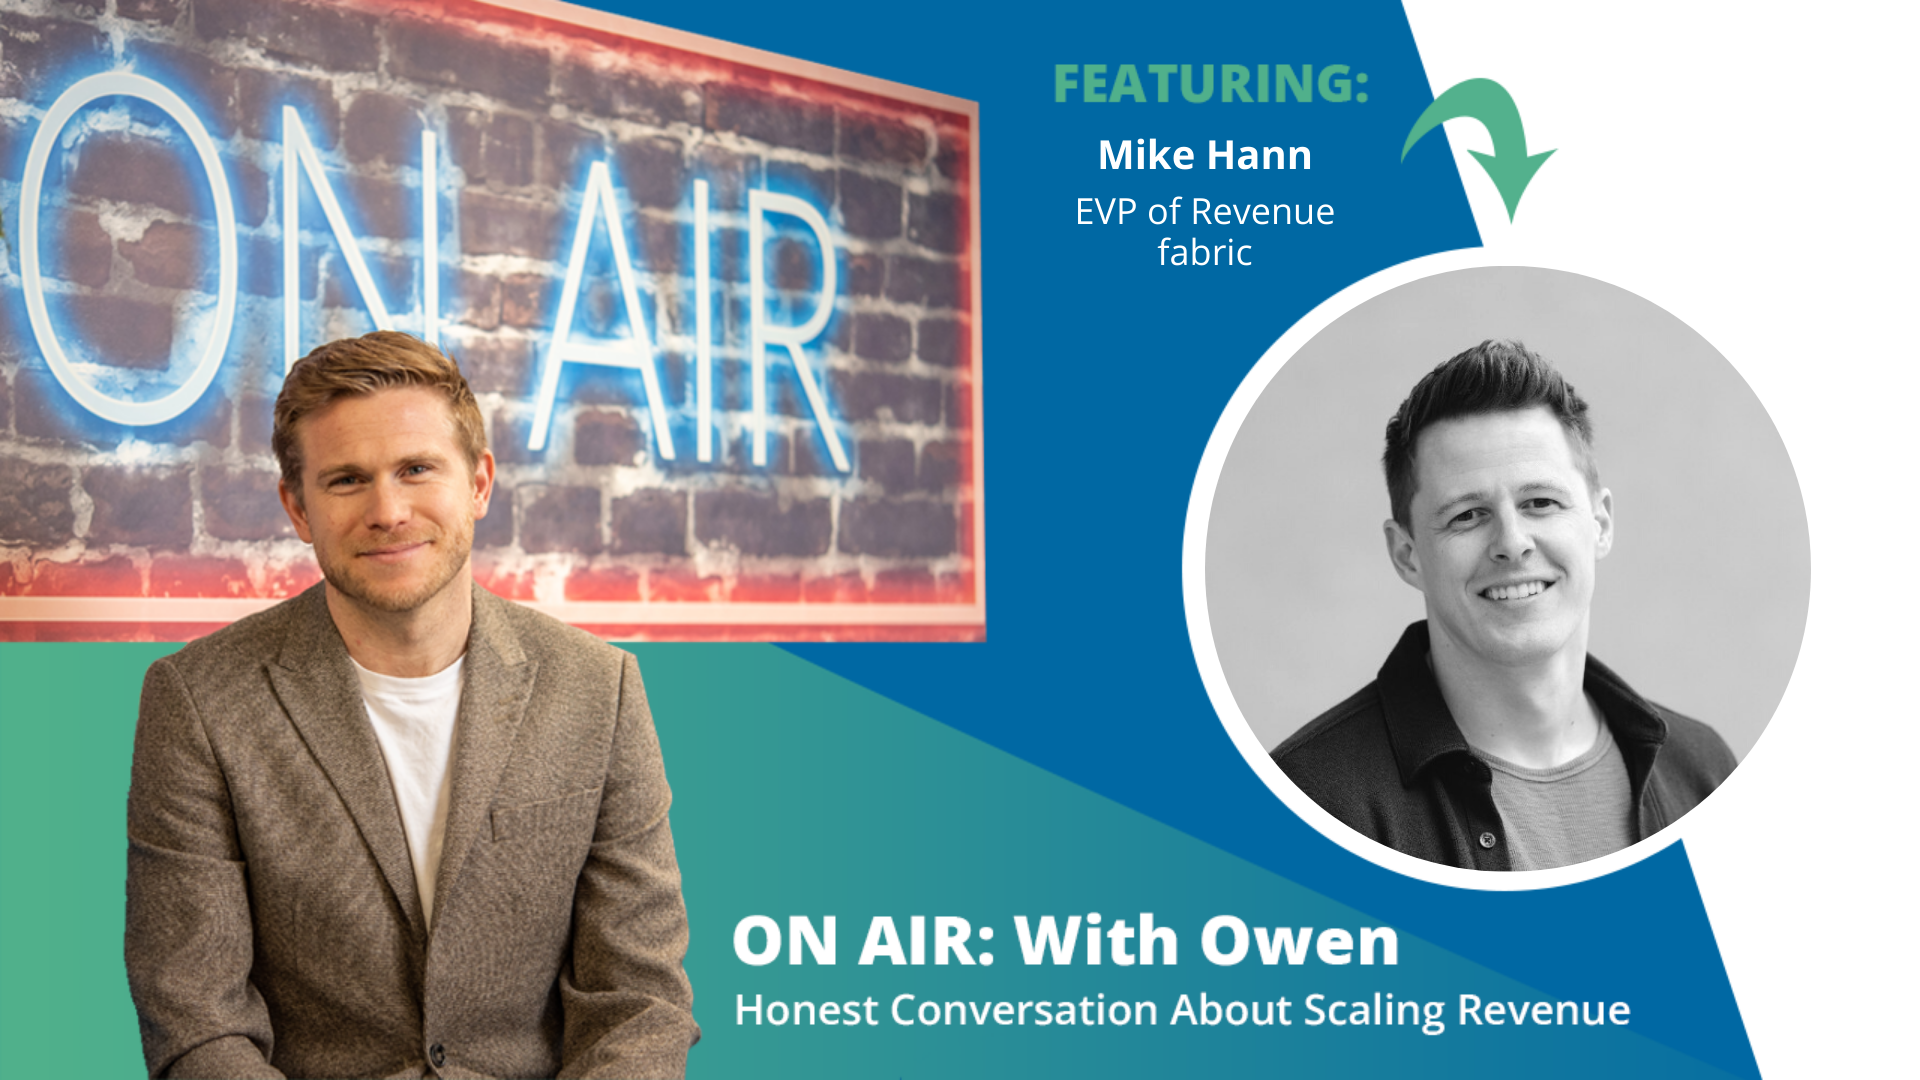 ON AIR: With Owen Episode 53 Featuring Mike Hann – EVP of Revenue at fabric